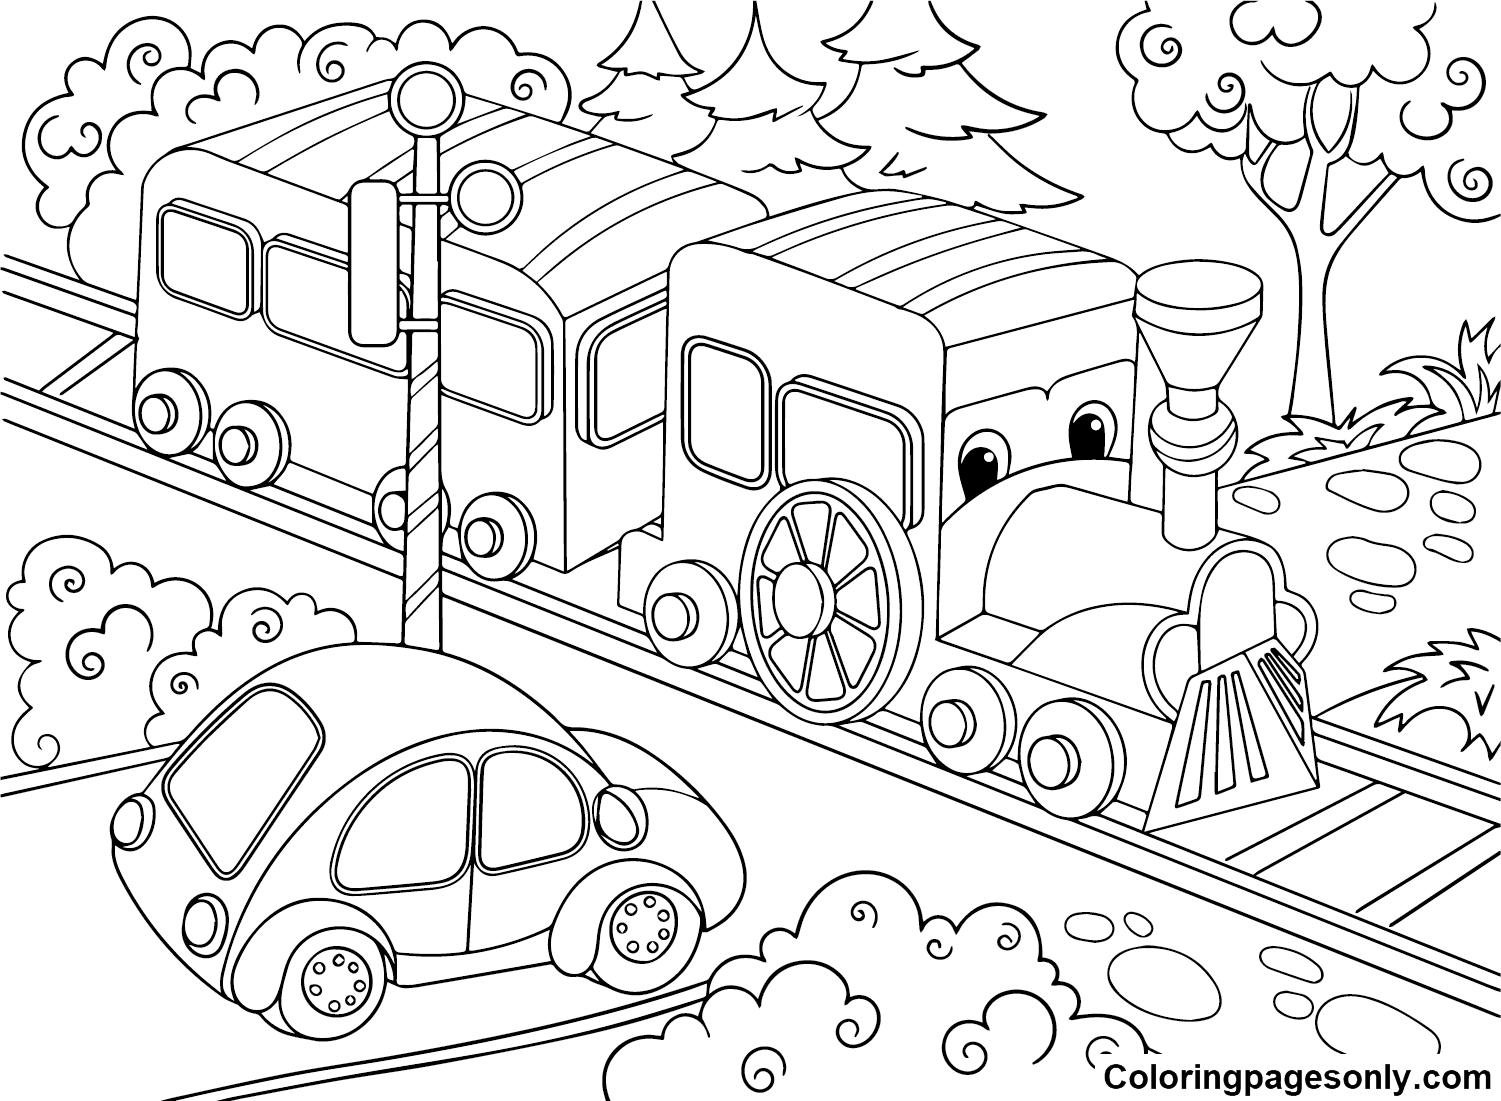 Old Choo Choo Train Coloring Pages - Train Coloring Pages - Coloring ...